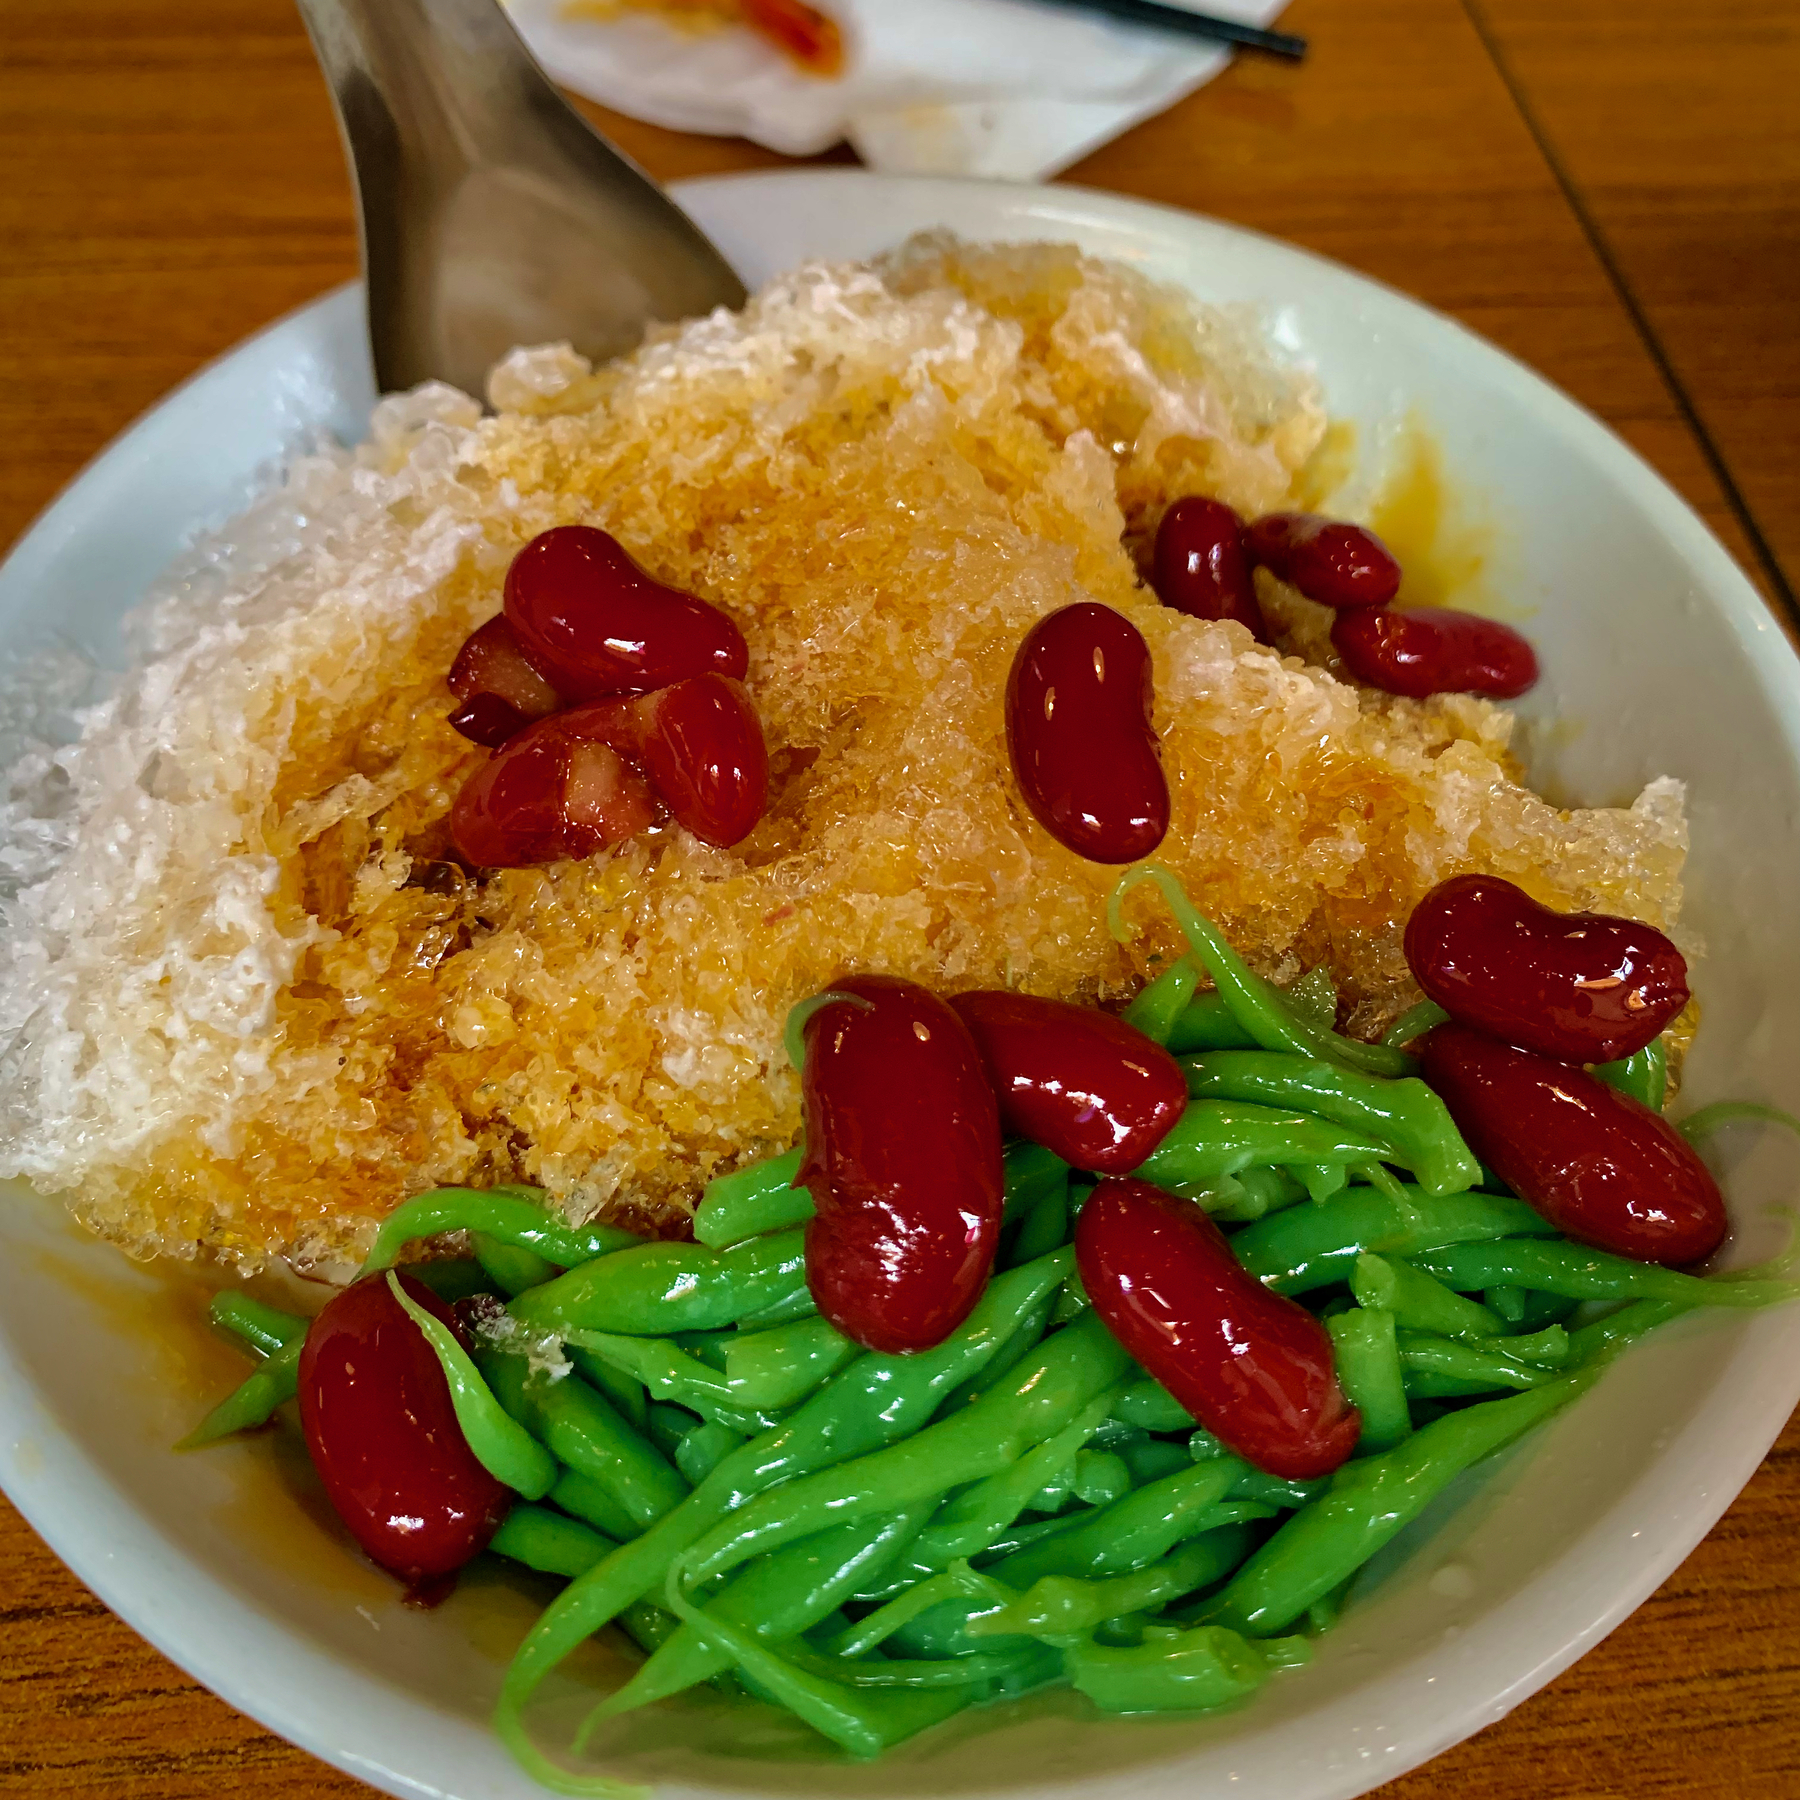 Cendol , a bowl of shaved idea topped with coconut milk, palm sugar syrup, red beans etc.